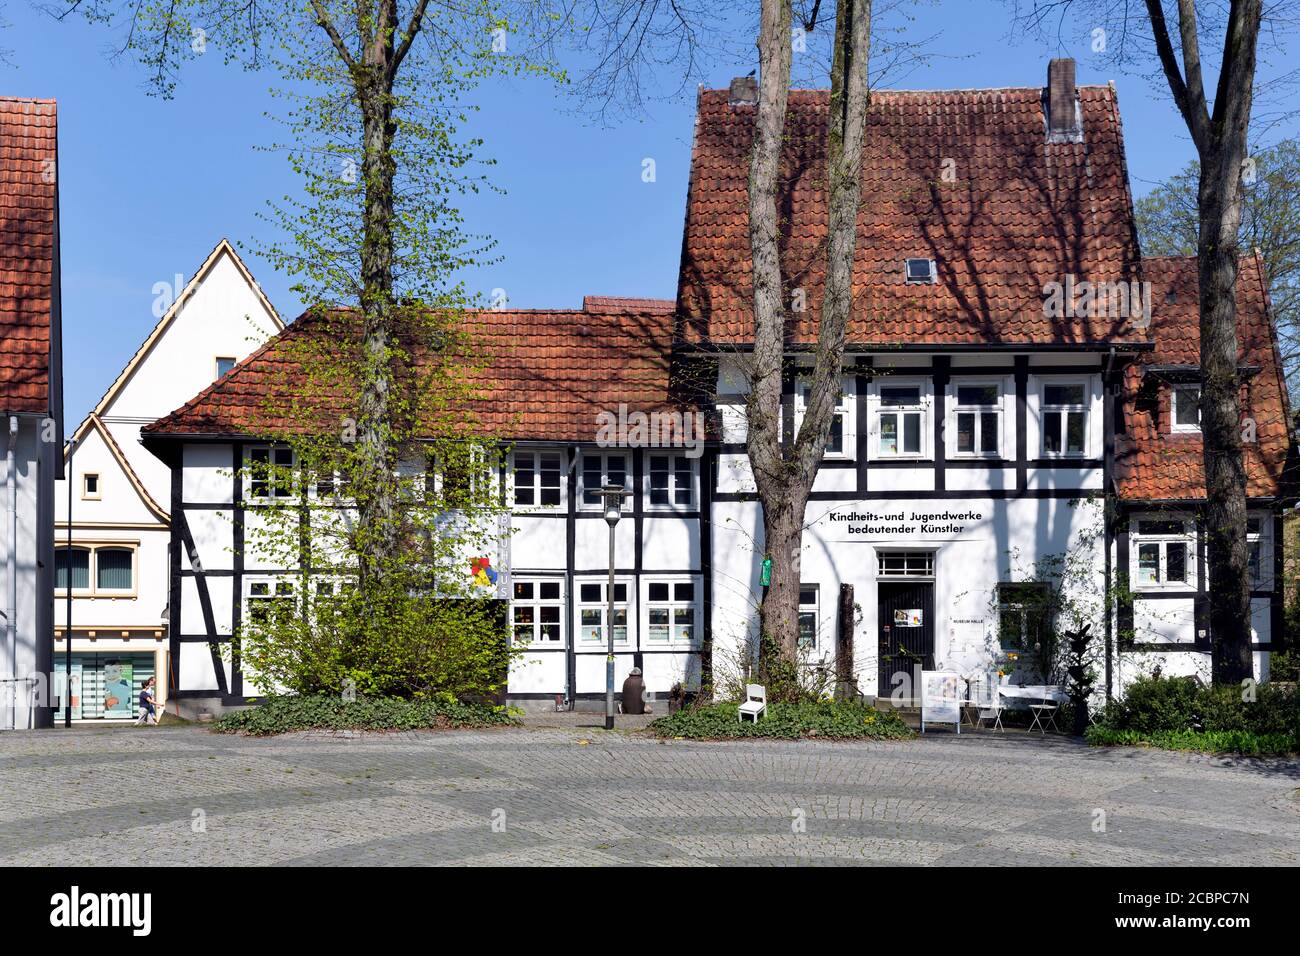 Museum for childhood and youth works of important artists, half-timbered houses in Haller Herz, Halle, East Westphalia, North Rhine-Westphalia Stock Photo